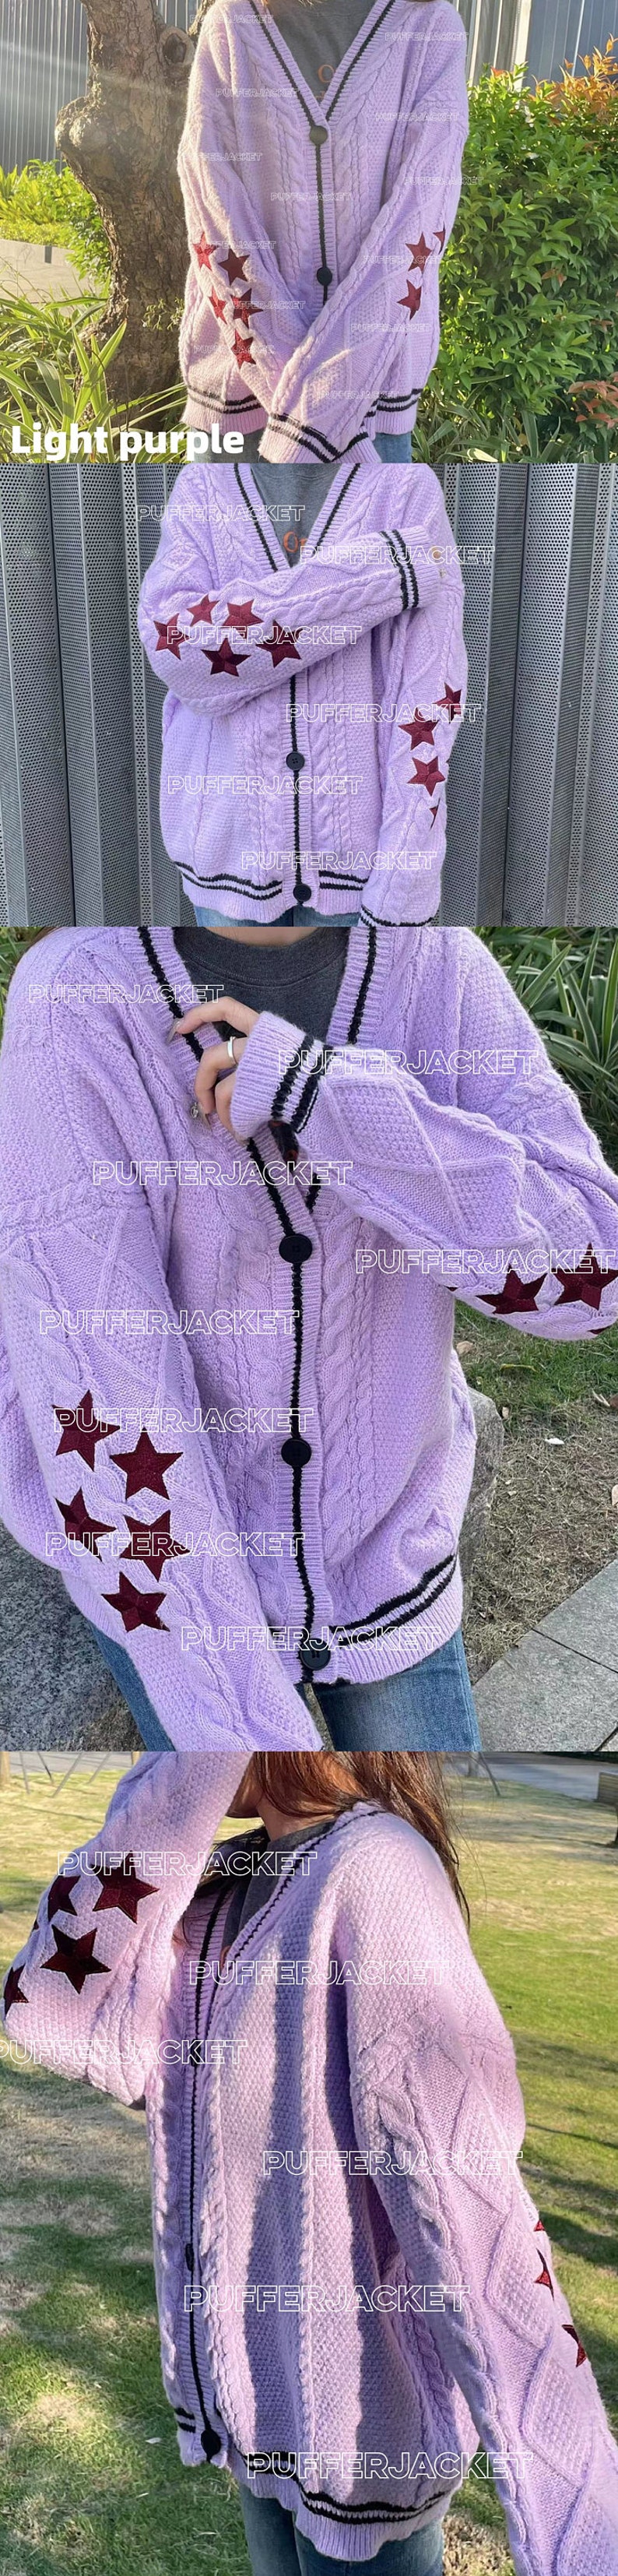 1989 blue folk cardigan/star embroidered cardigan/v-neck oversized cute hand-knitted holiday button sweater/gift for fans Light purple